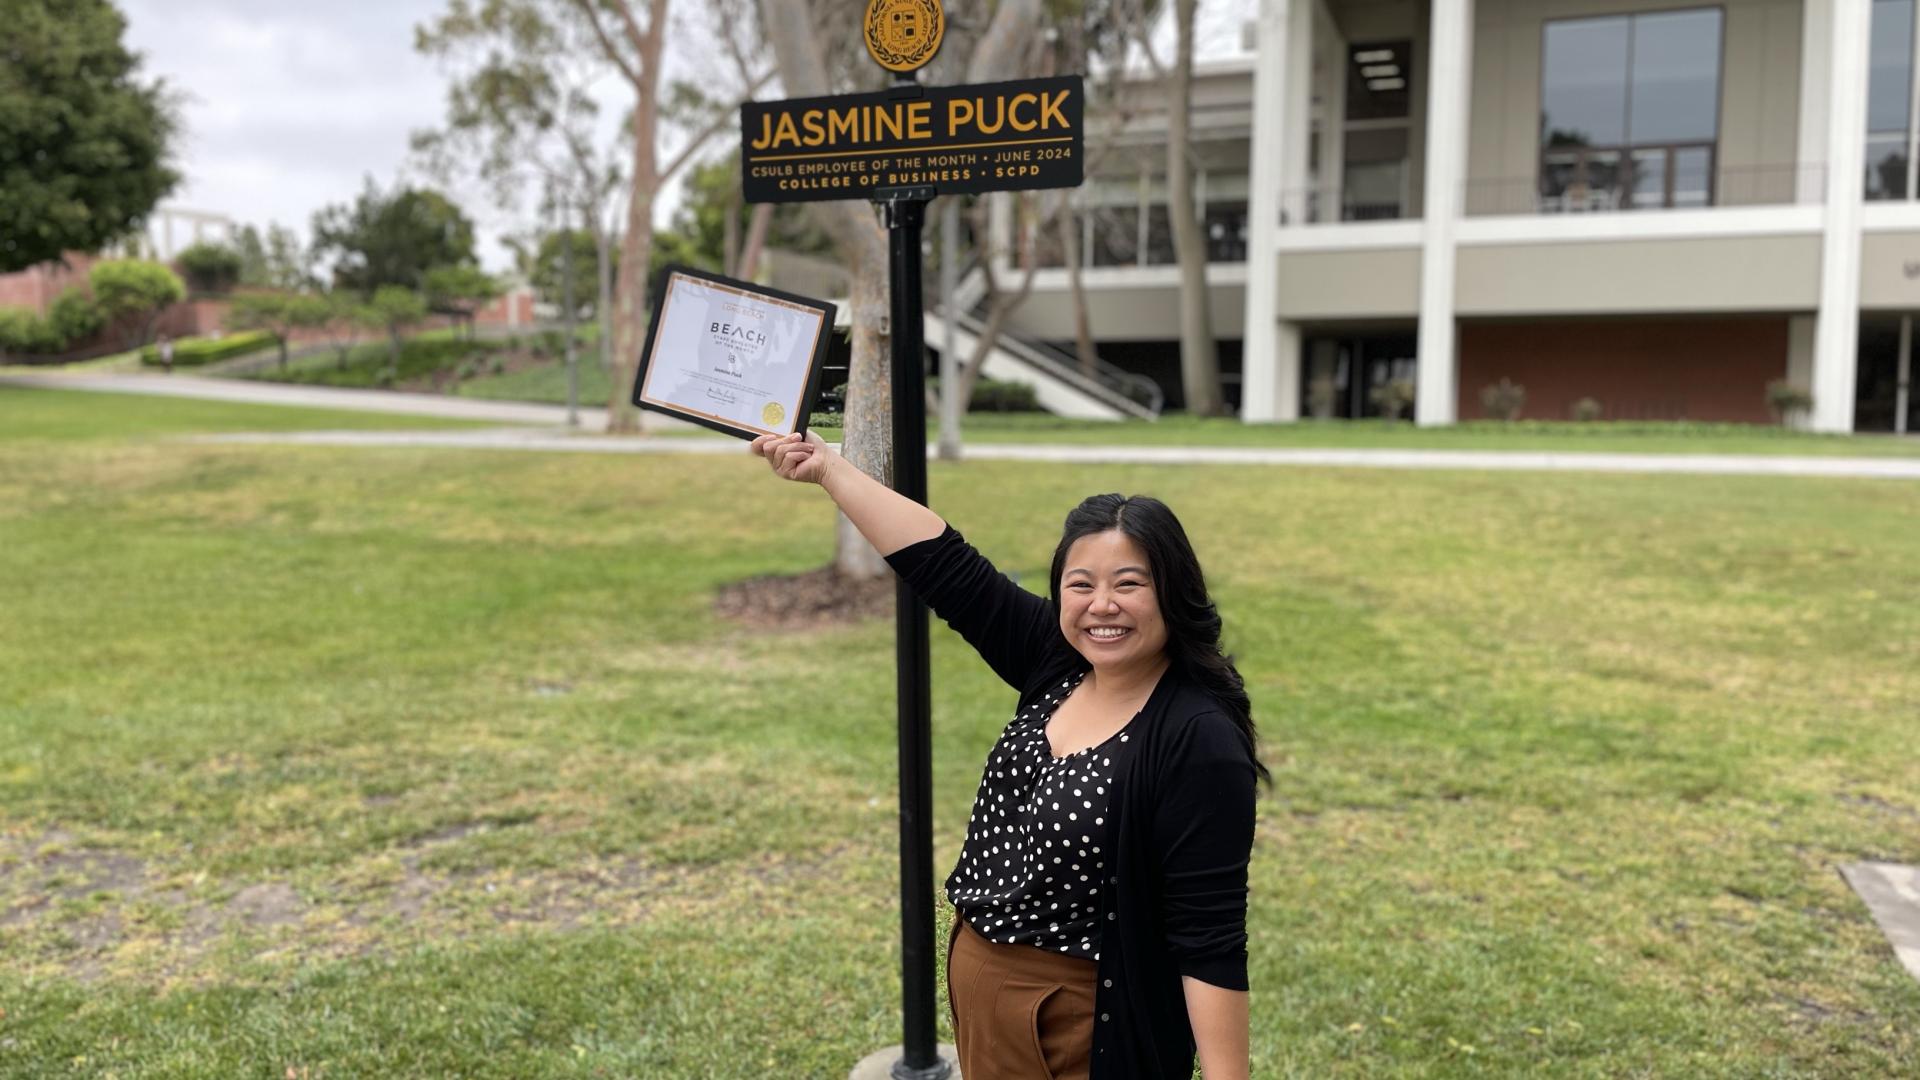 Jasmine Puck Award and her name sign on campus